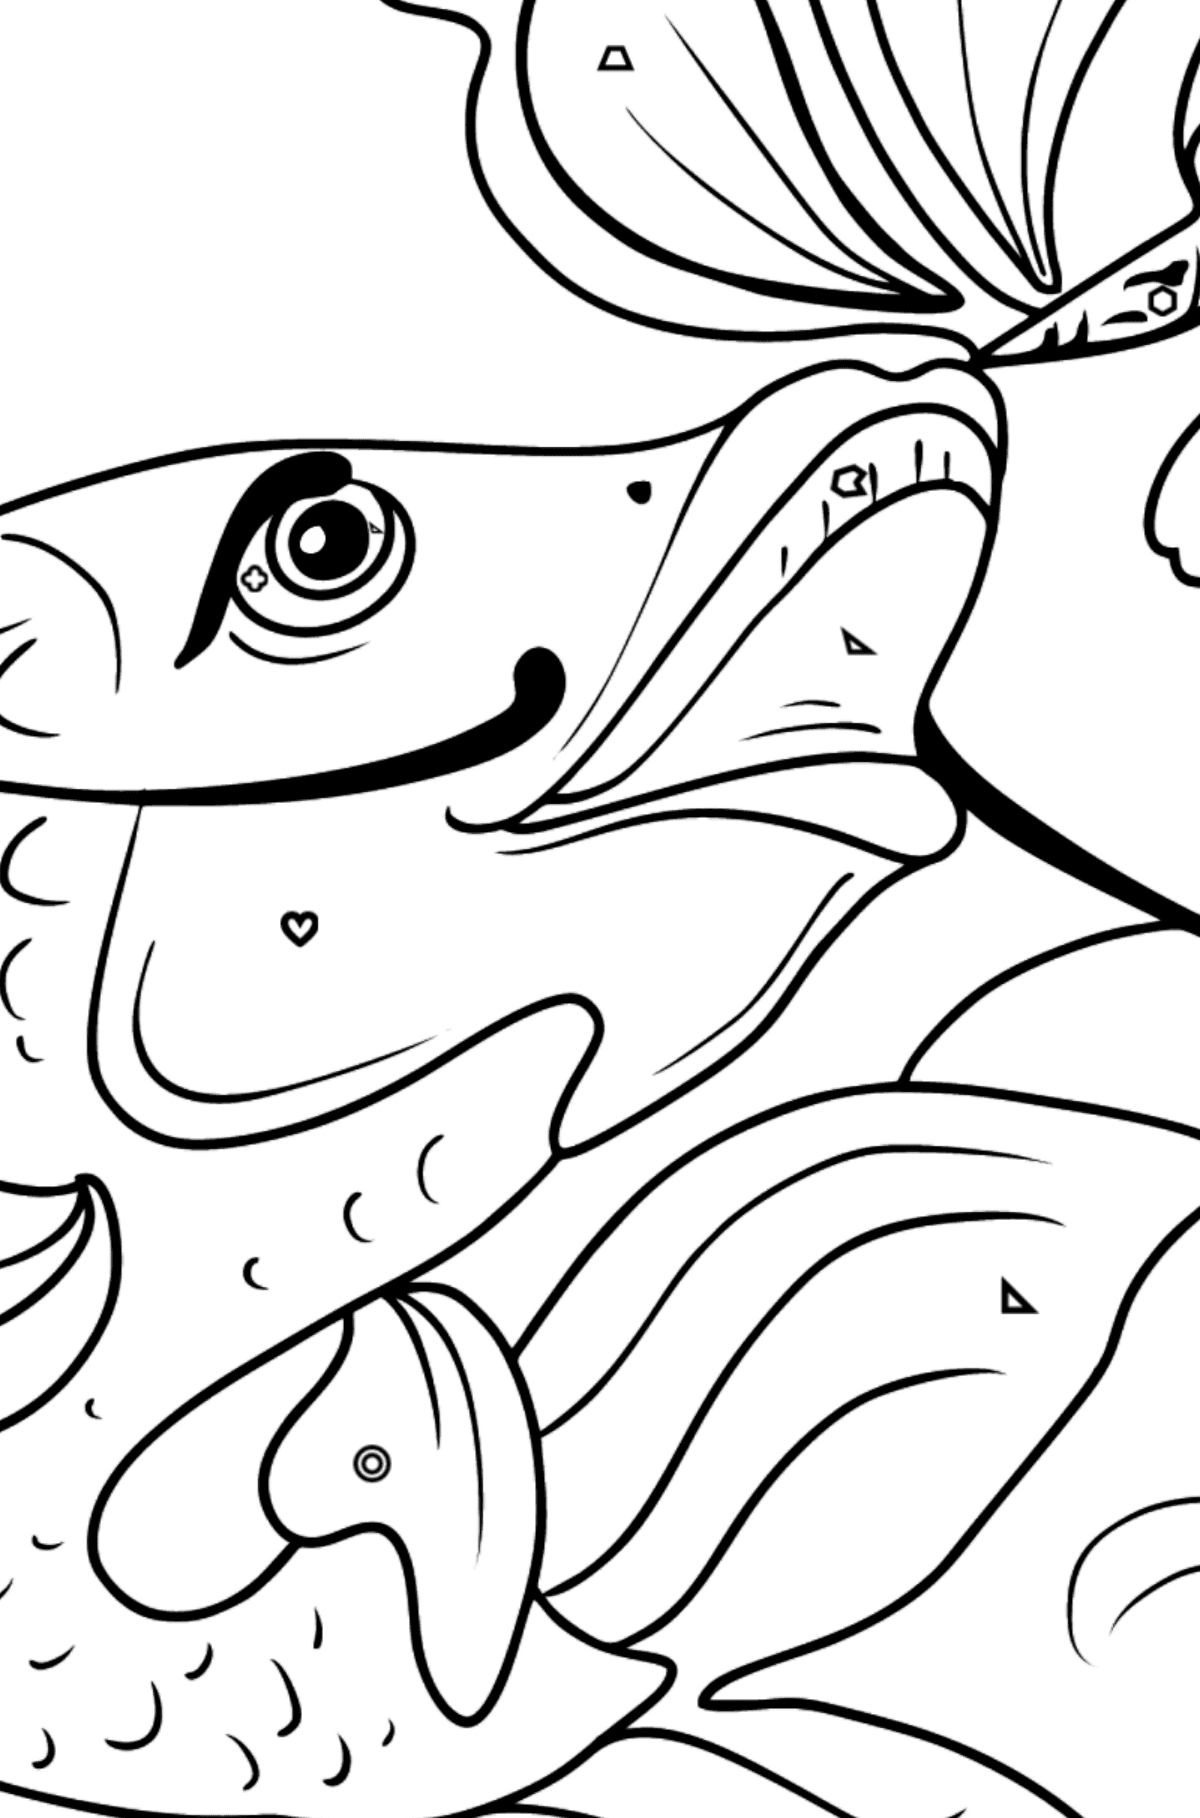 Fish and Butterfly coloring page - Coloring by Geometric Shapes for Kids